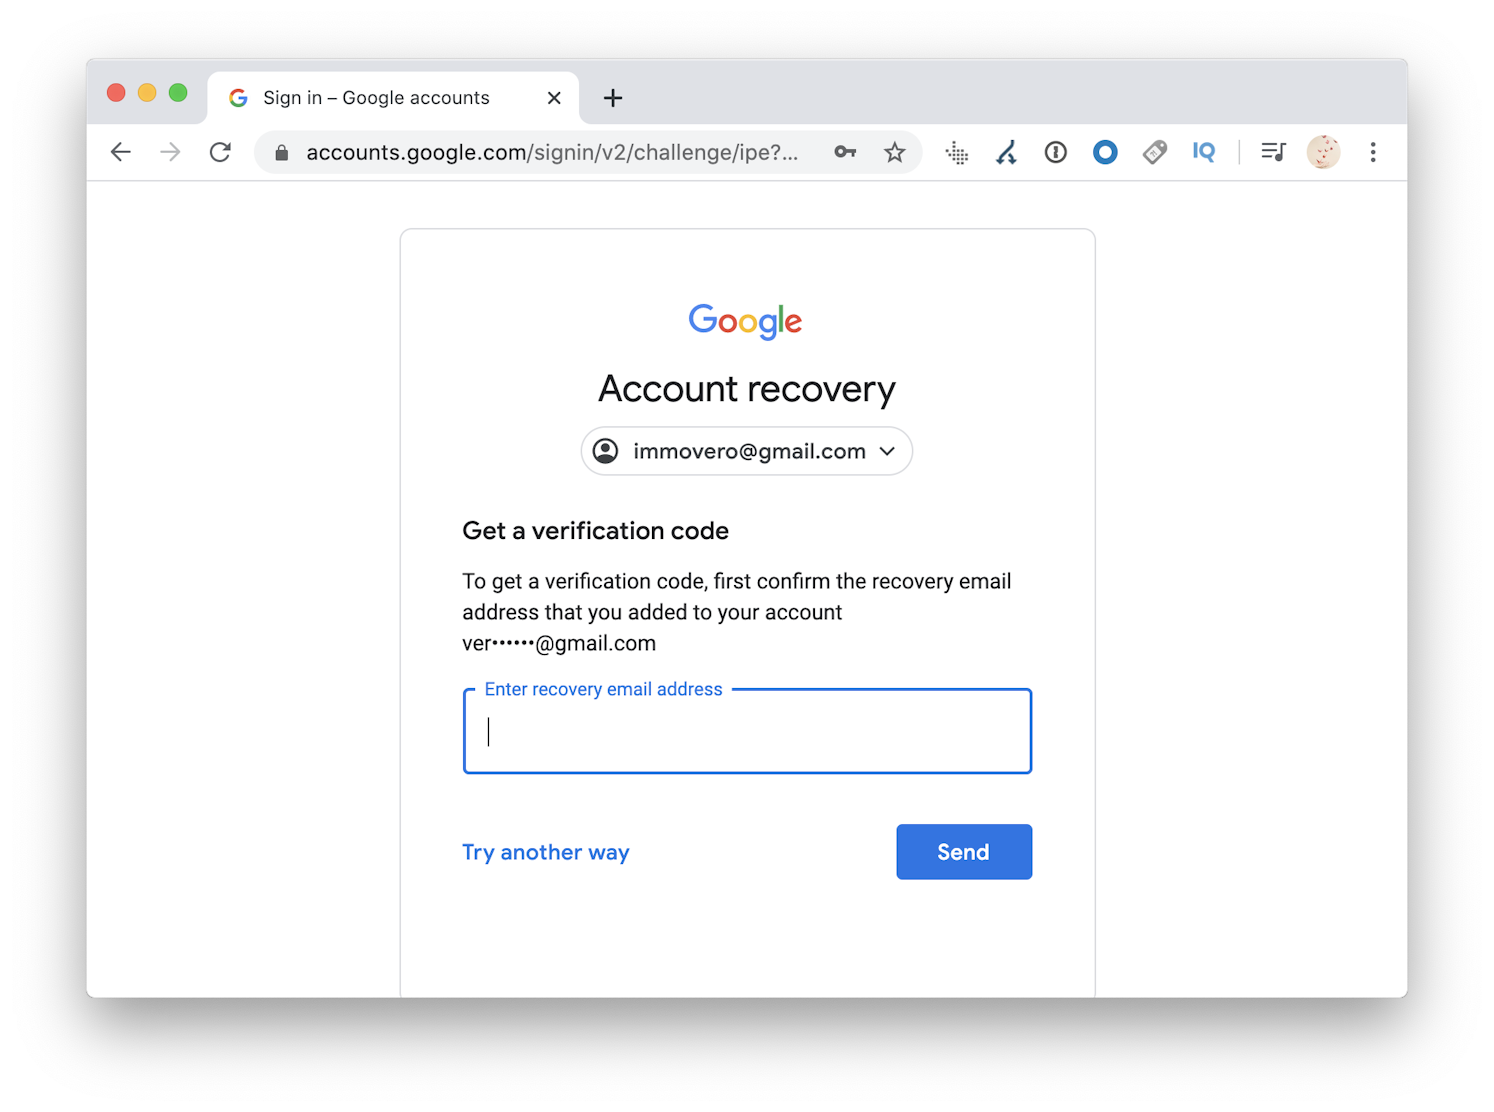 Google Account Recovery Guide